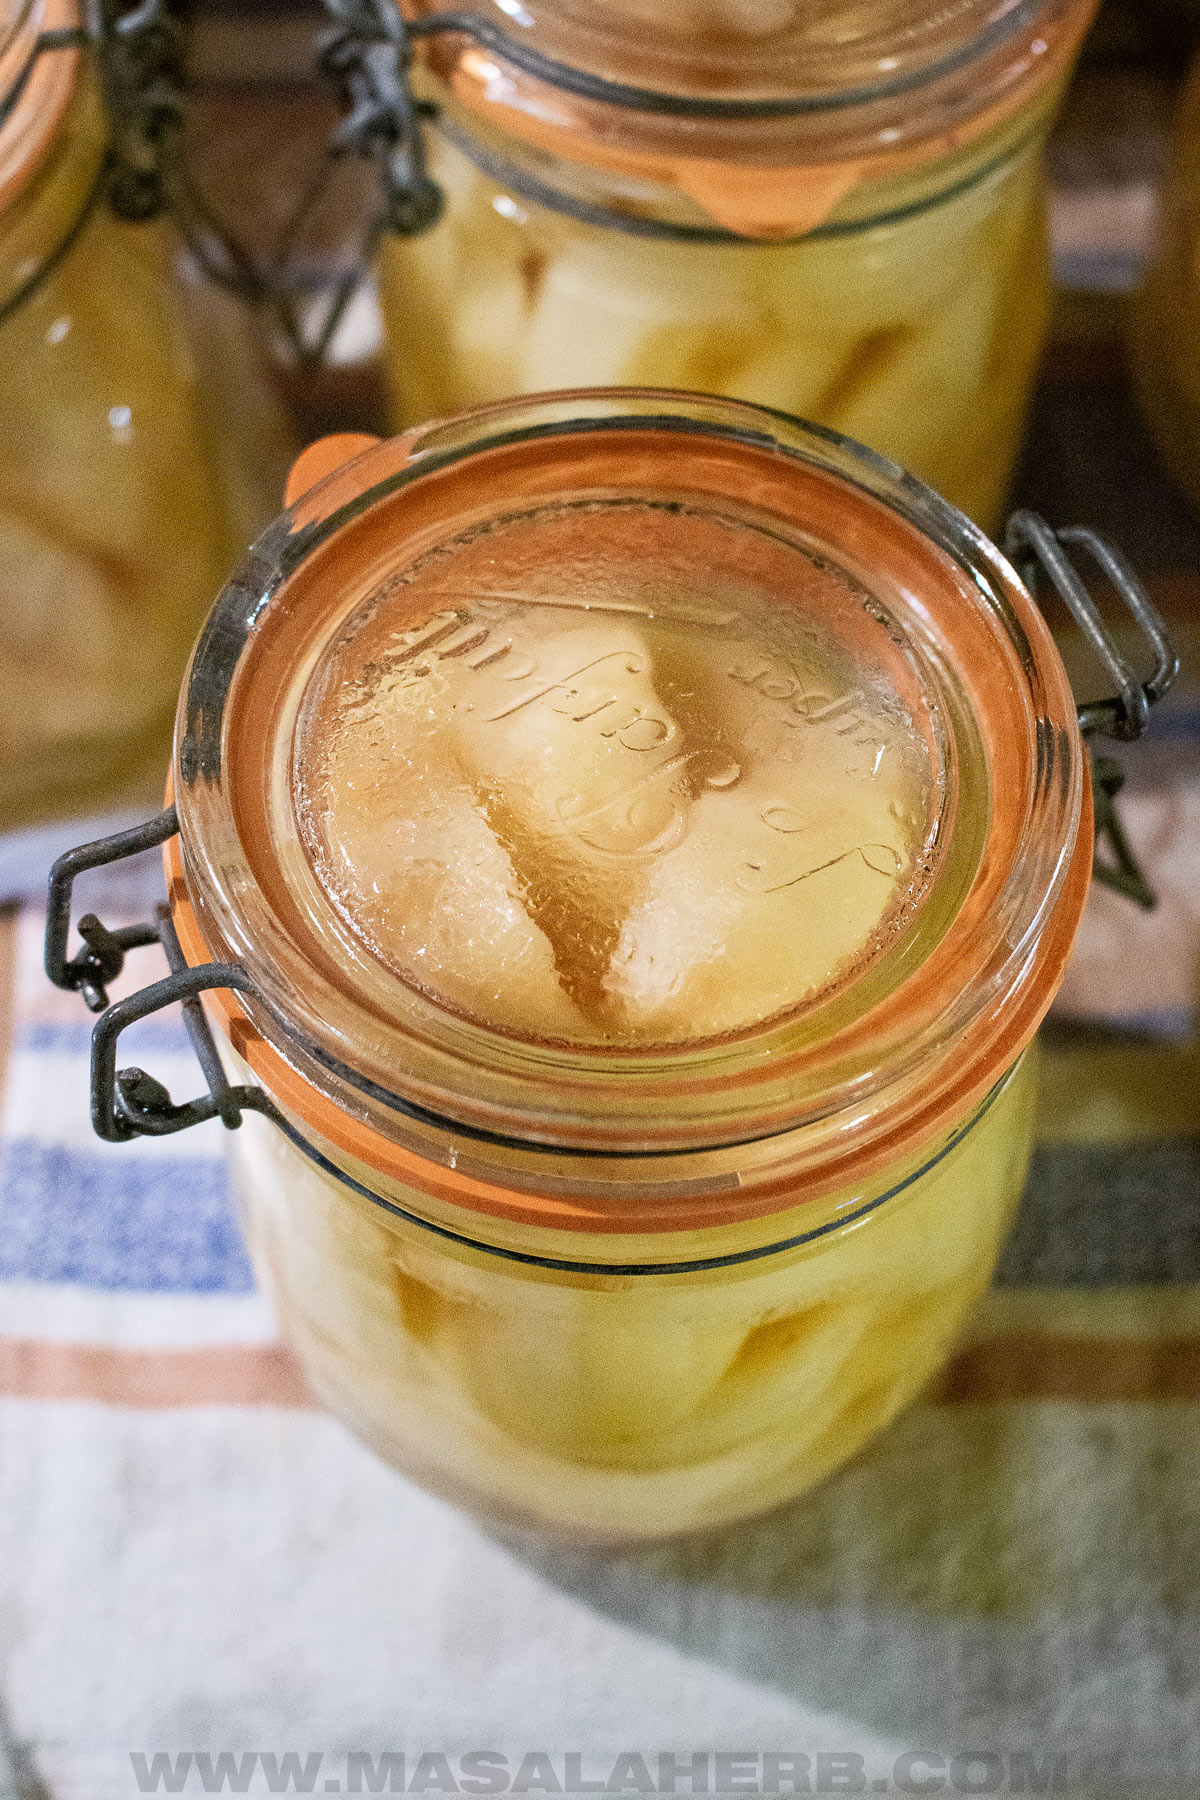 home canning pears in le parfait jars